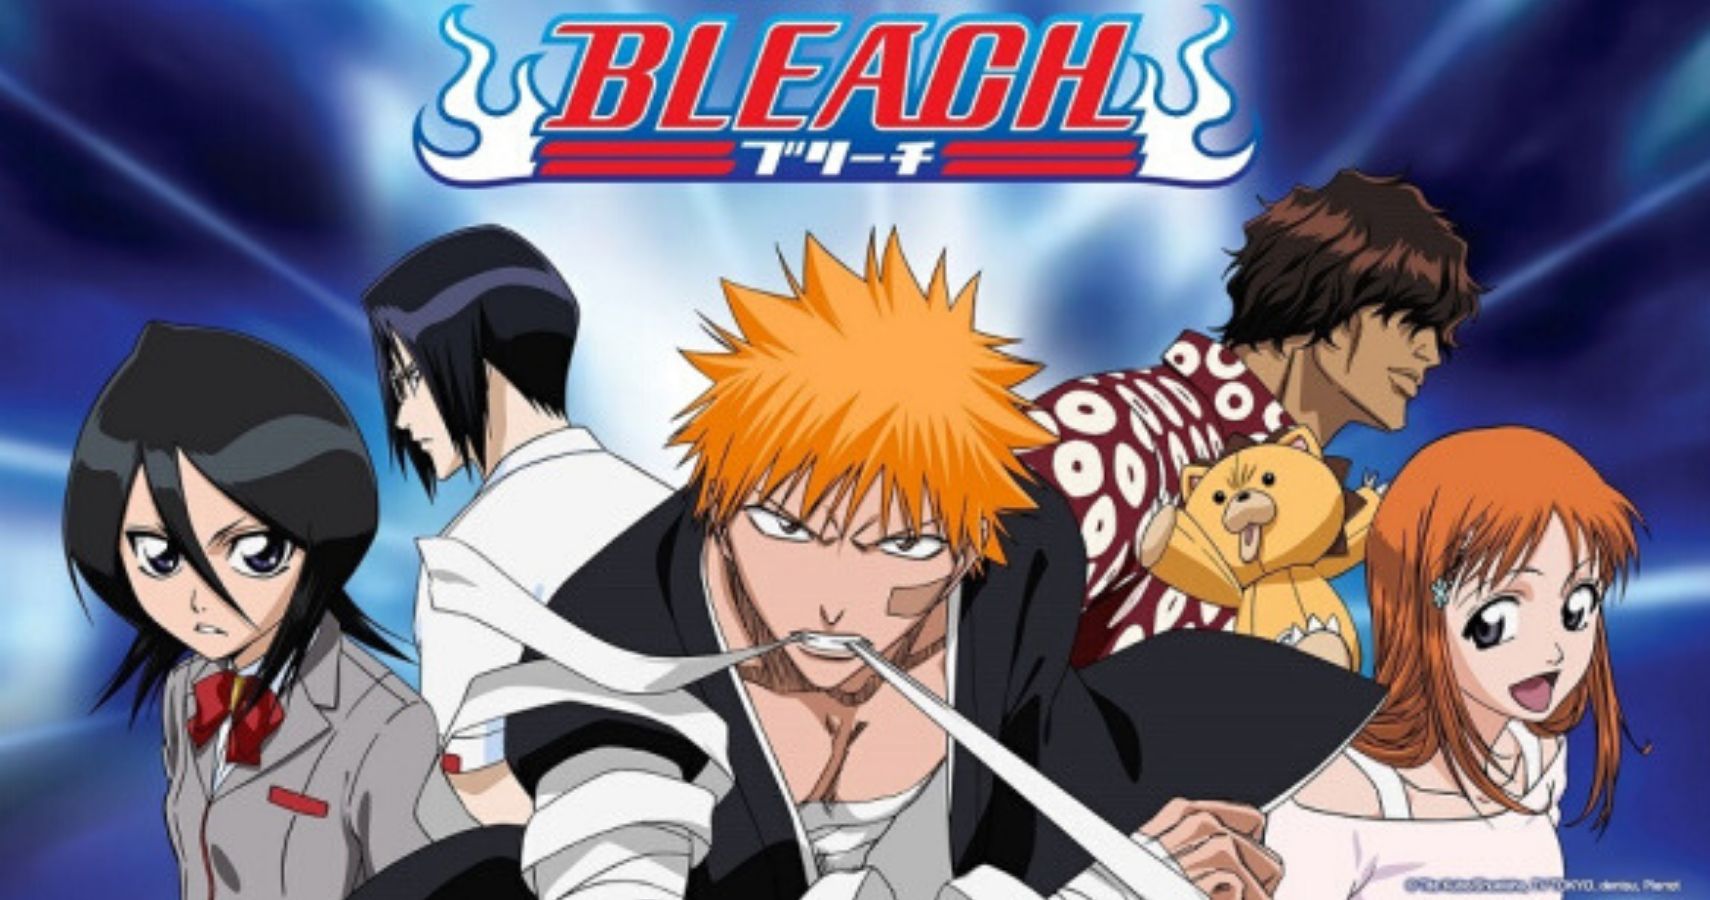 Bleach anime reportedly coming back with an adaptation of the